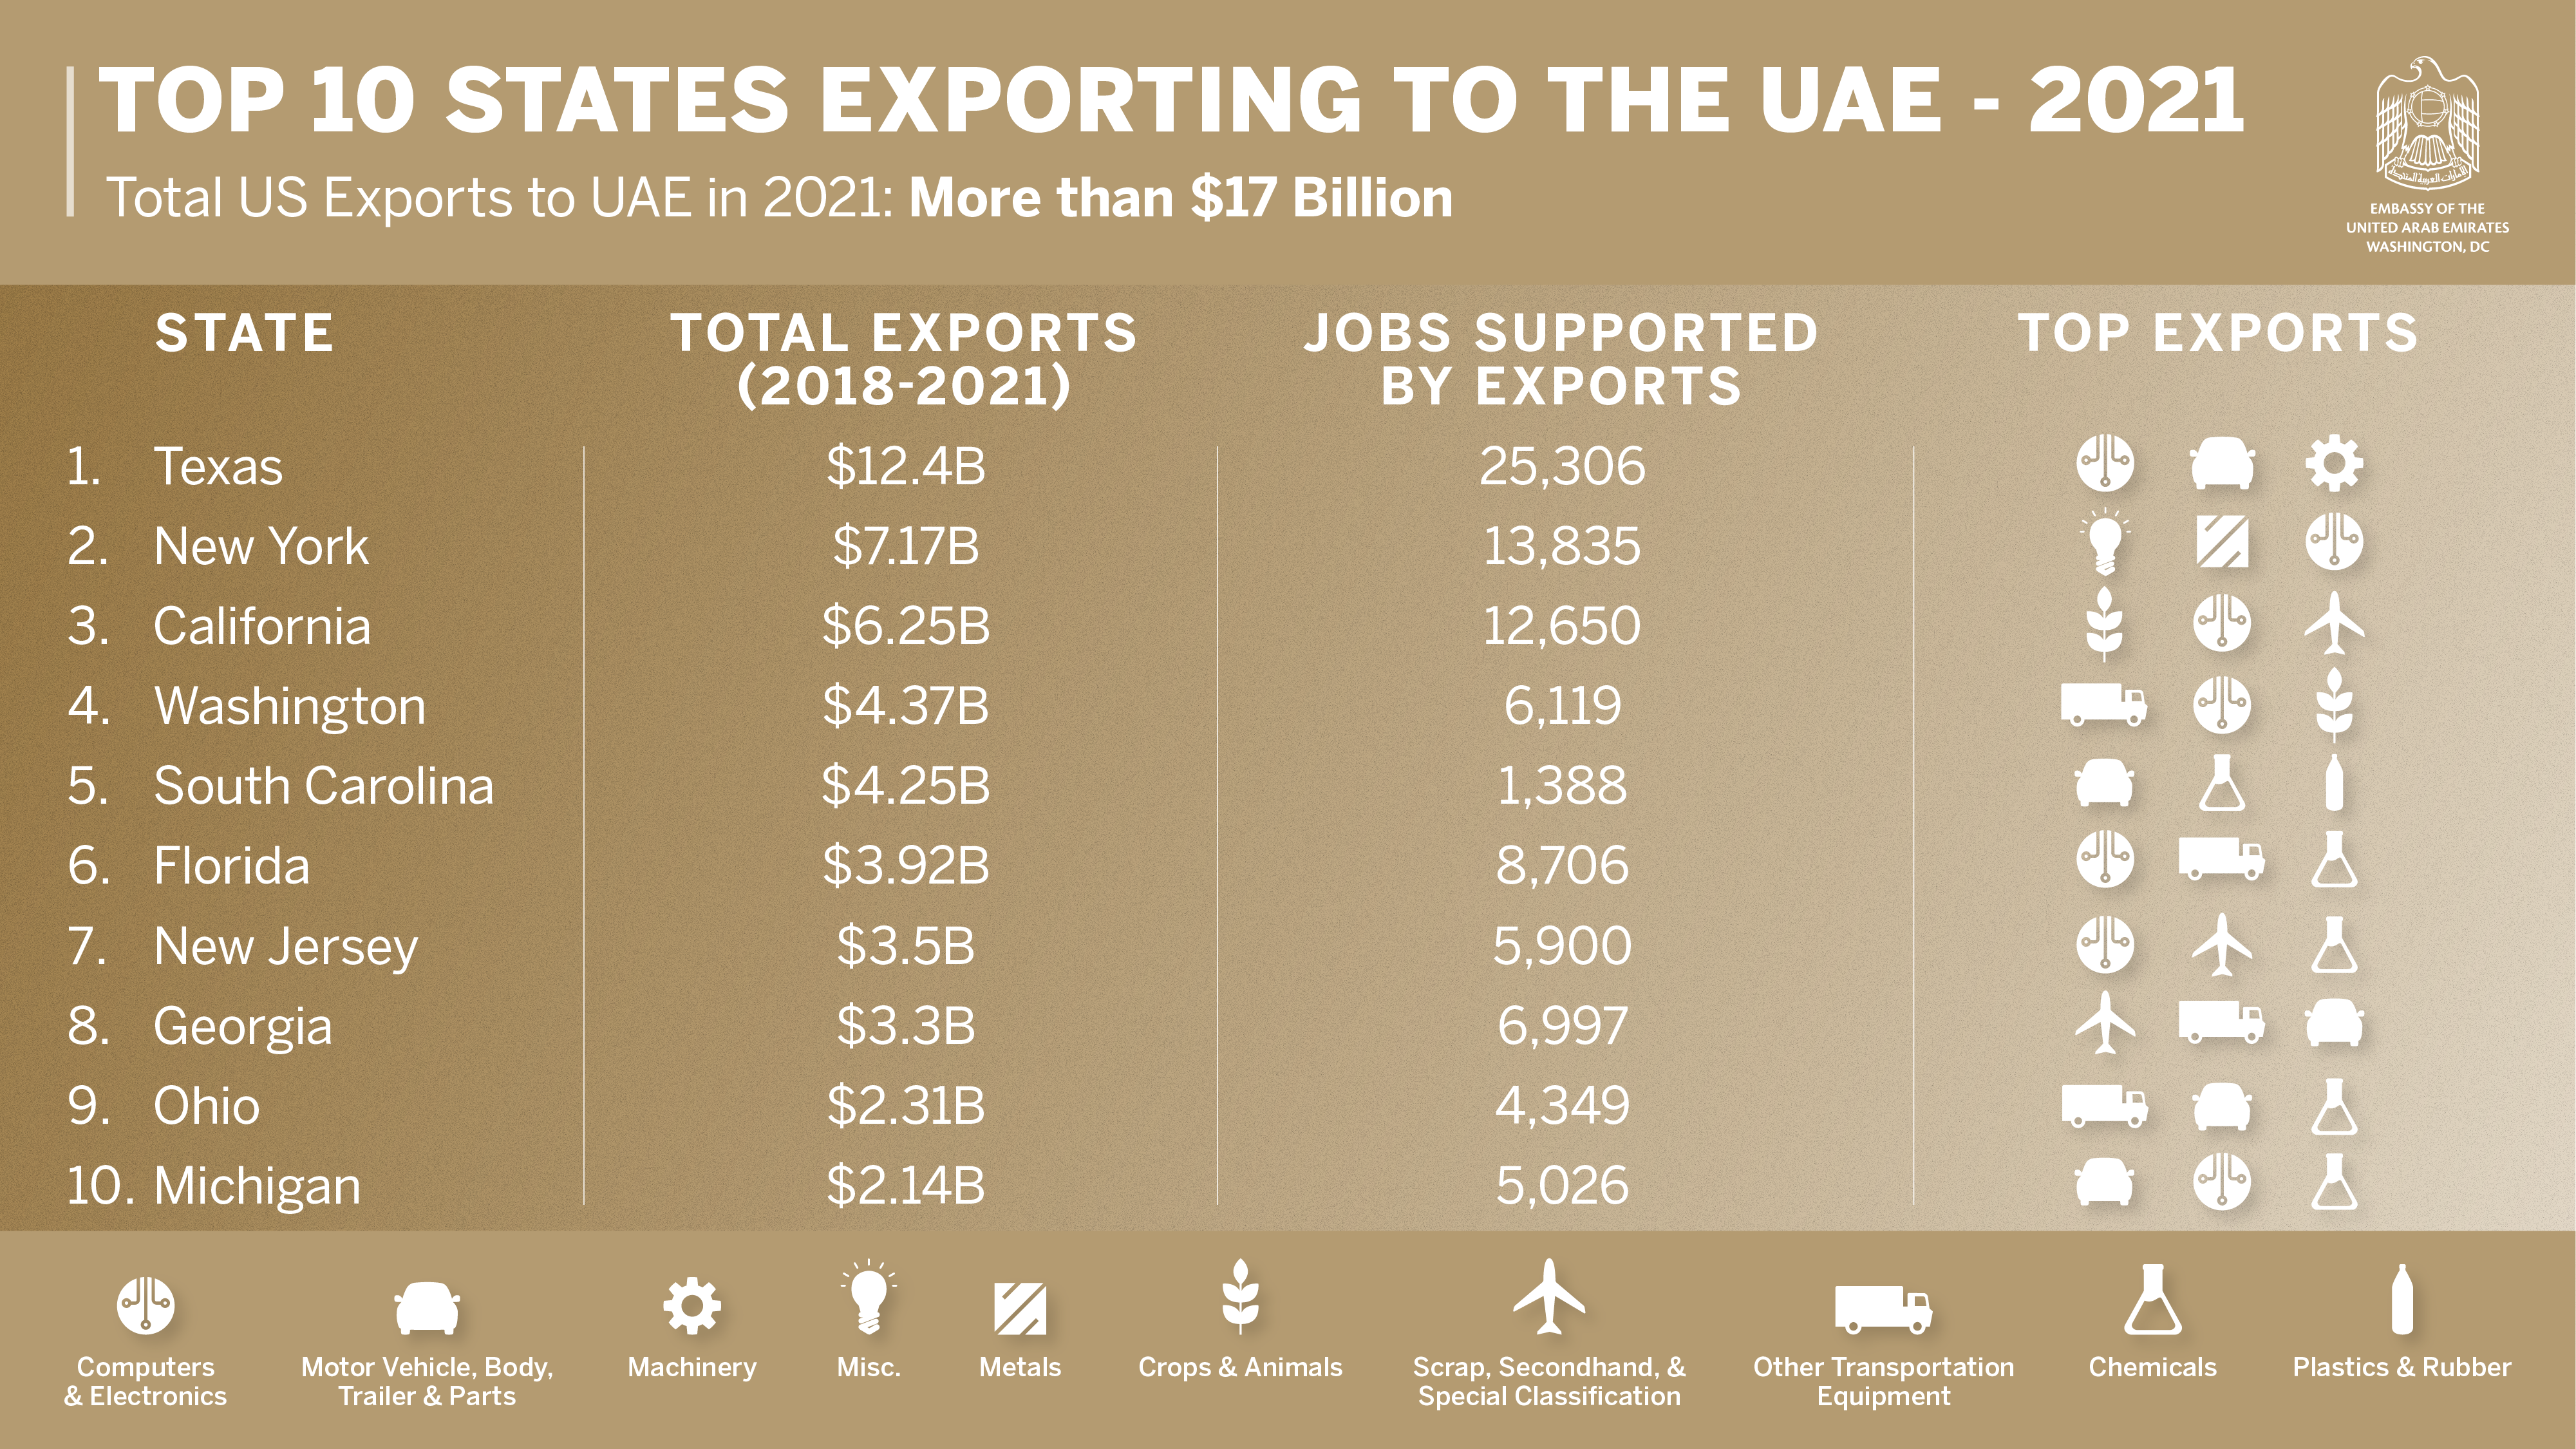 Total US Exports to UAE in 2021: More than $17 Billion